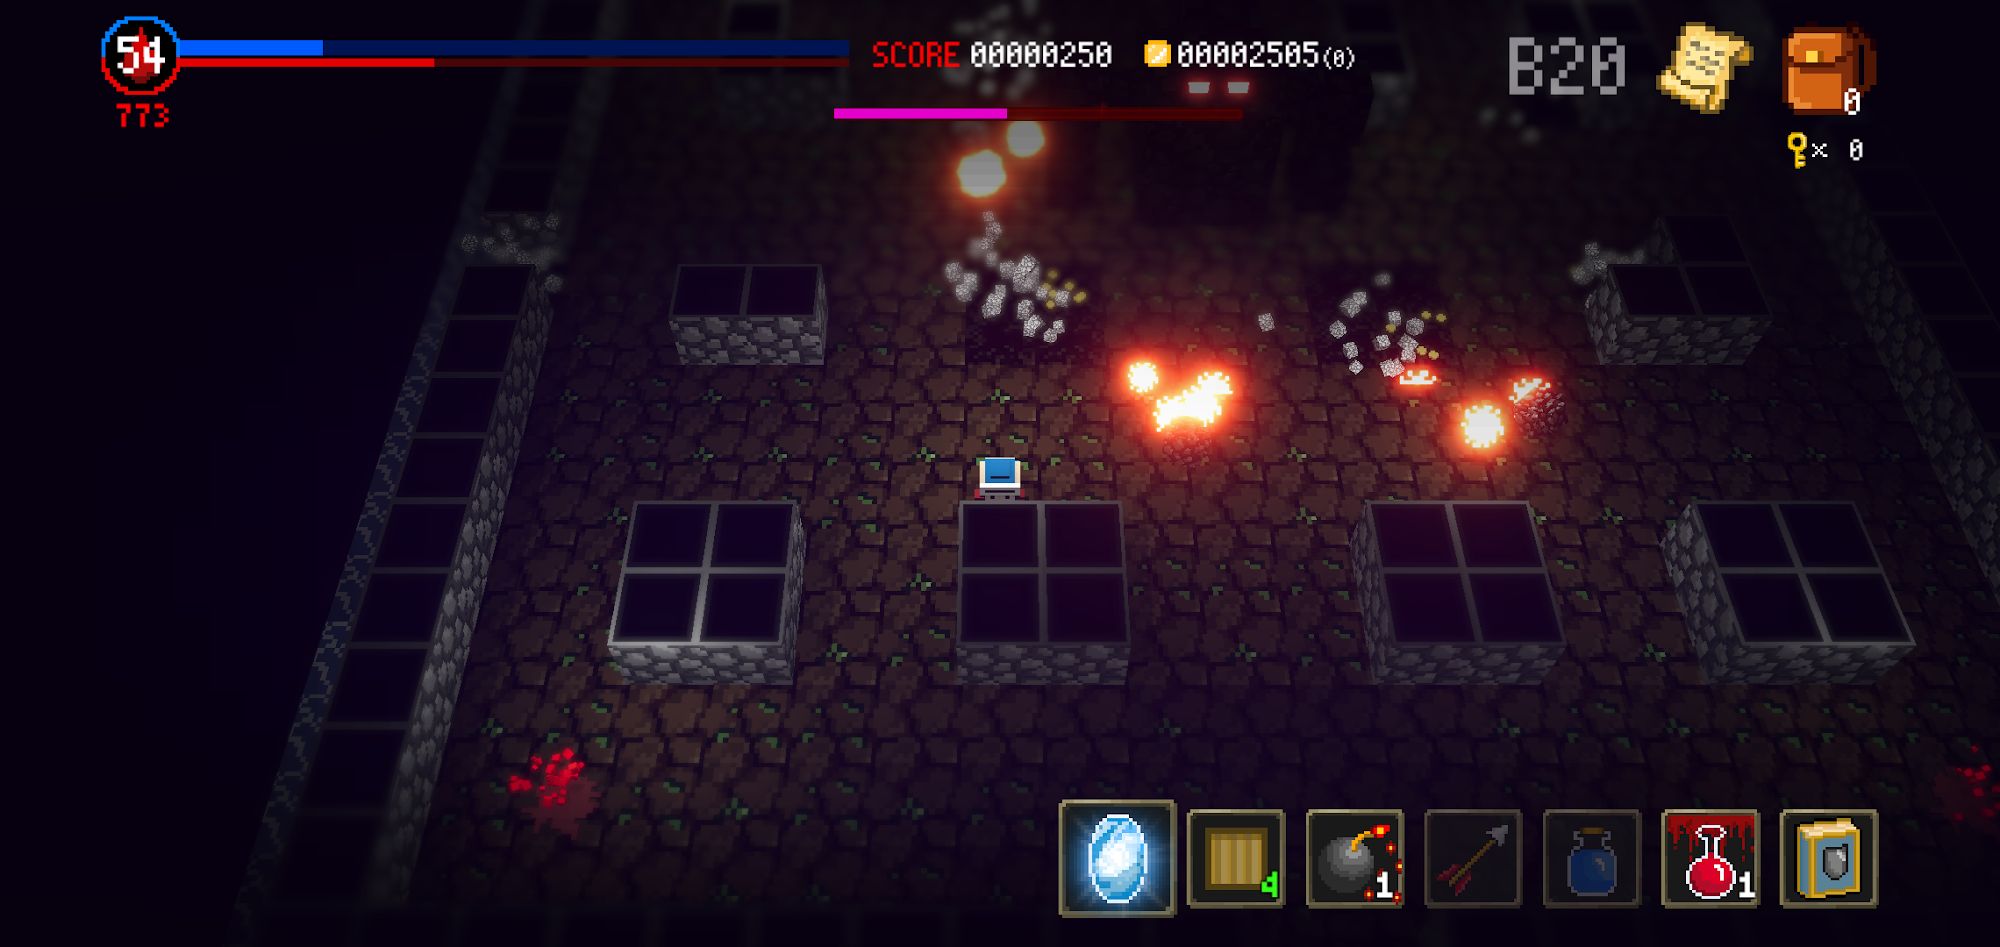 Dungeon and Gravestone - Android game screenshots.